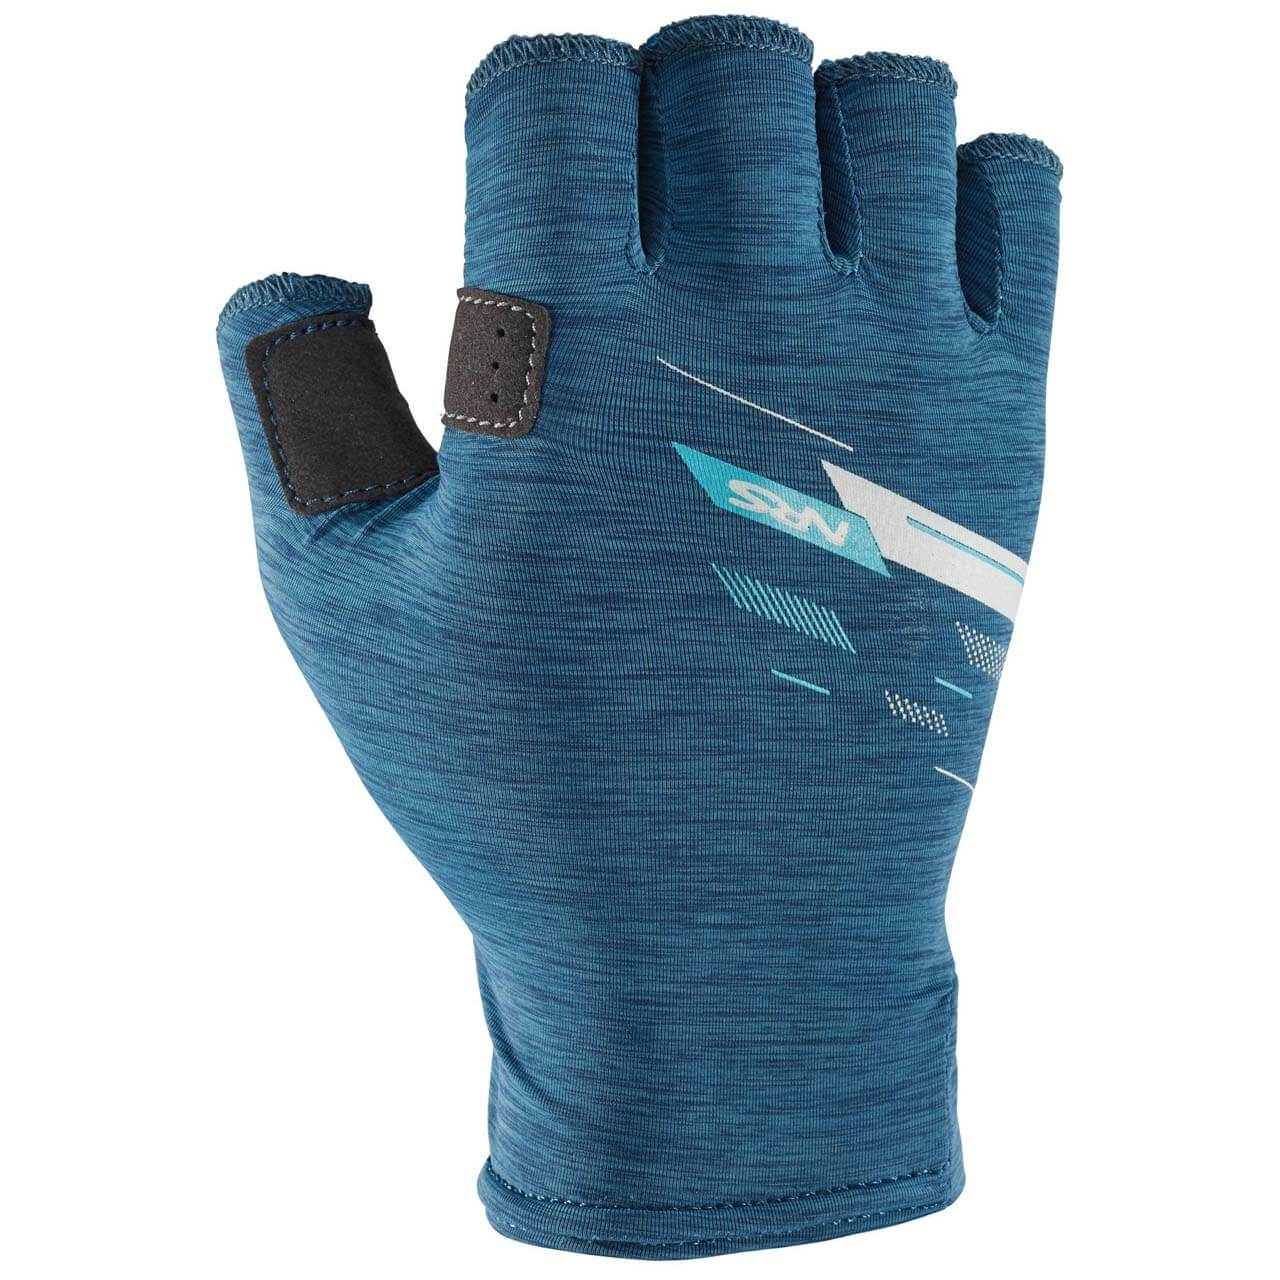 NRS Boaters Gloves - Poseidon, S